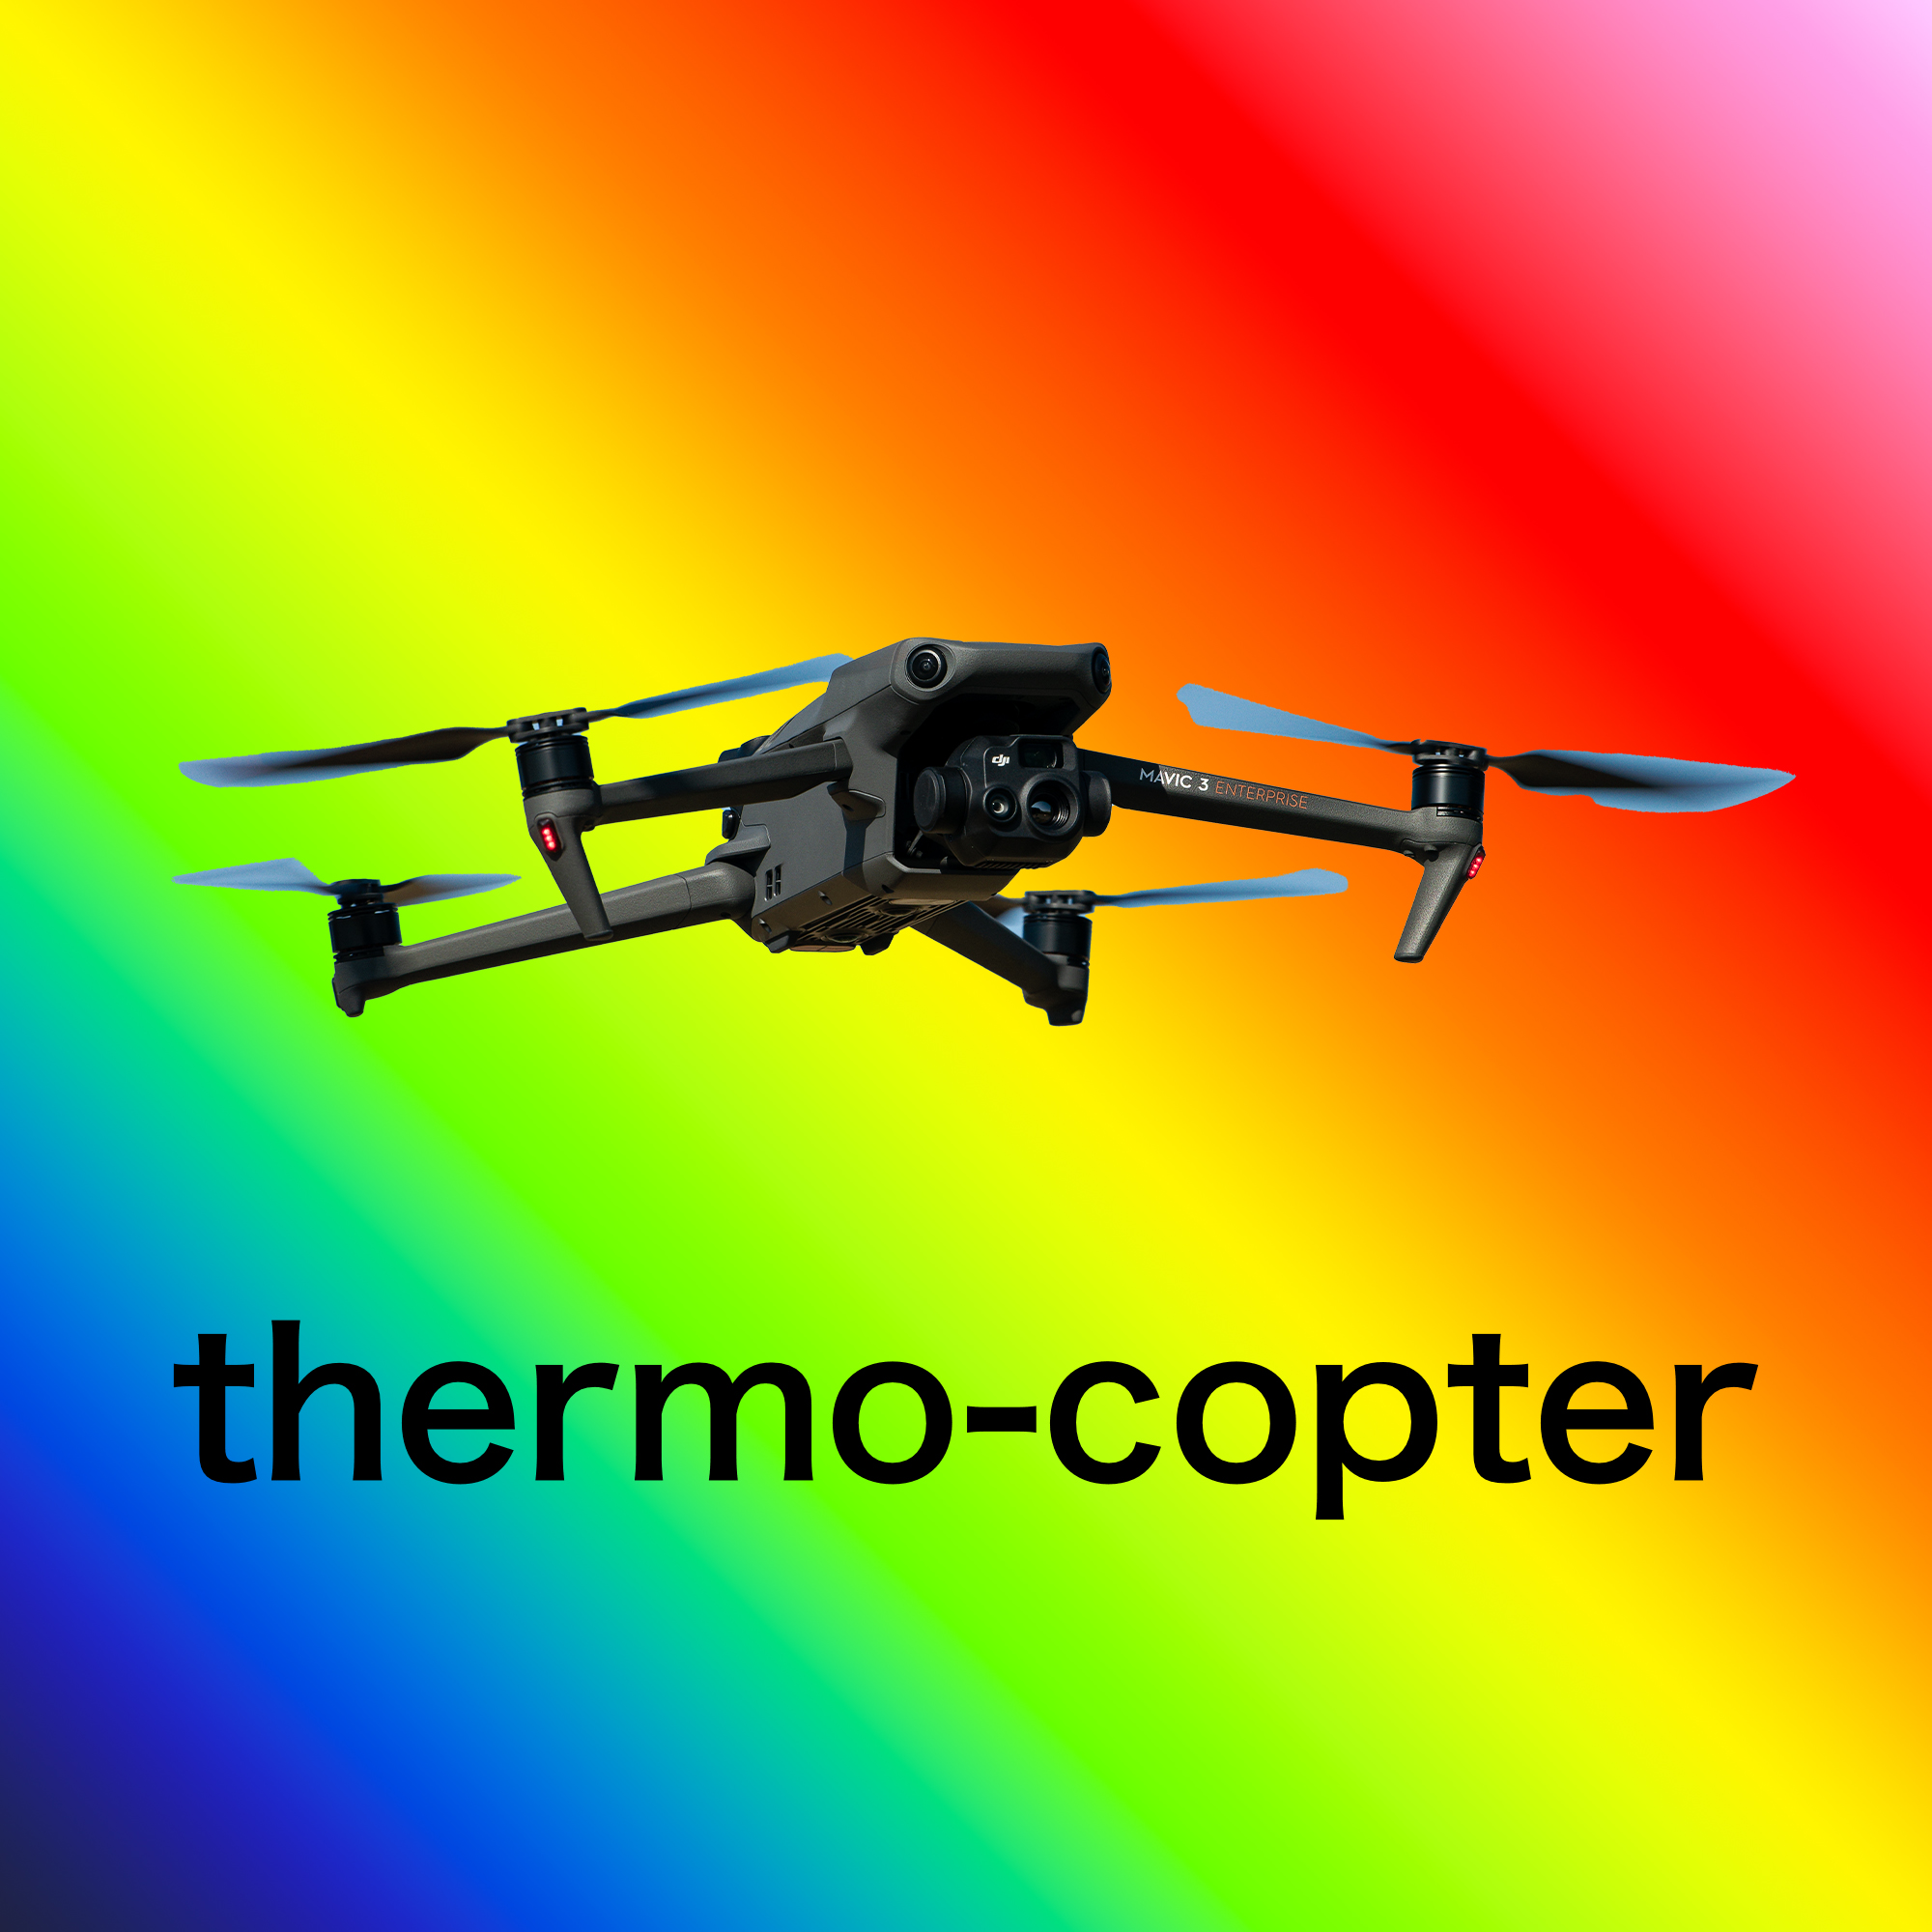 thermo-copter